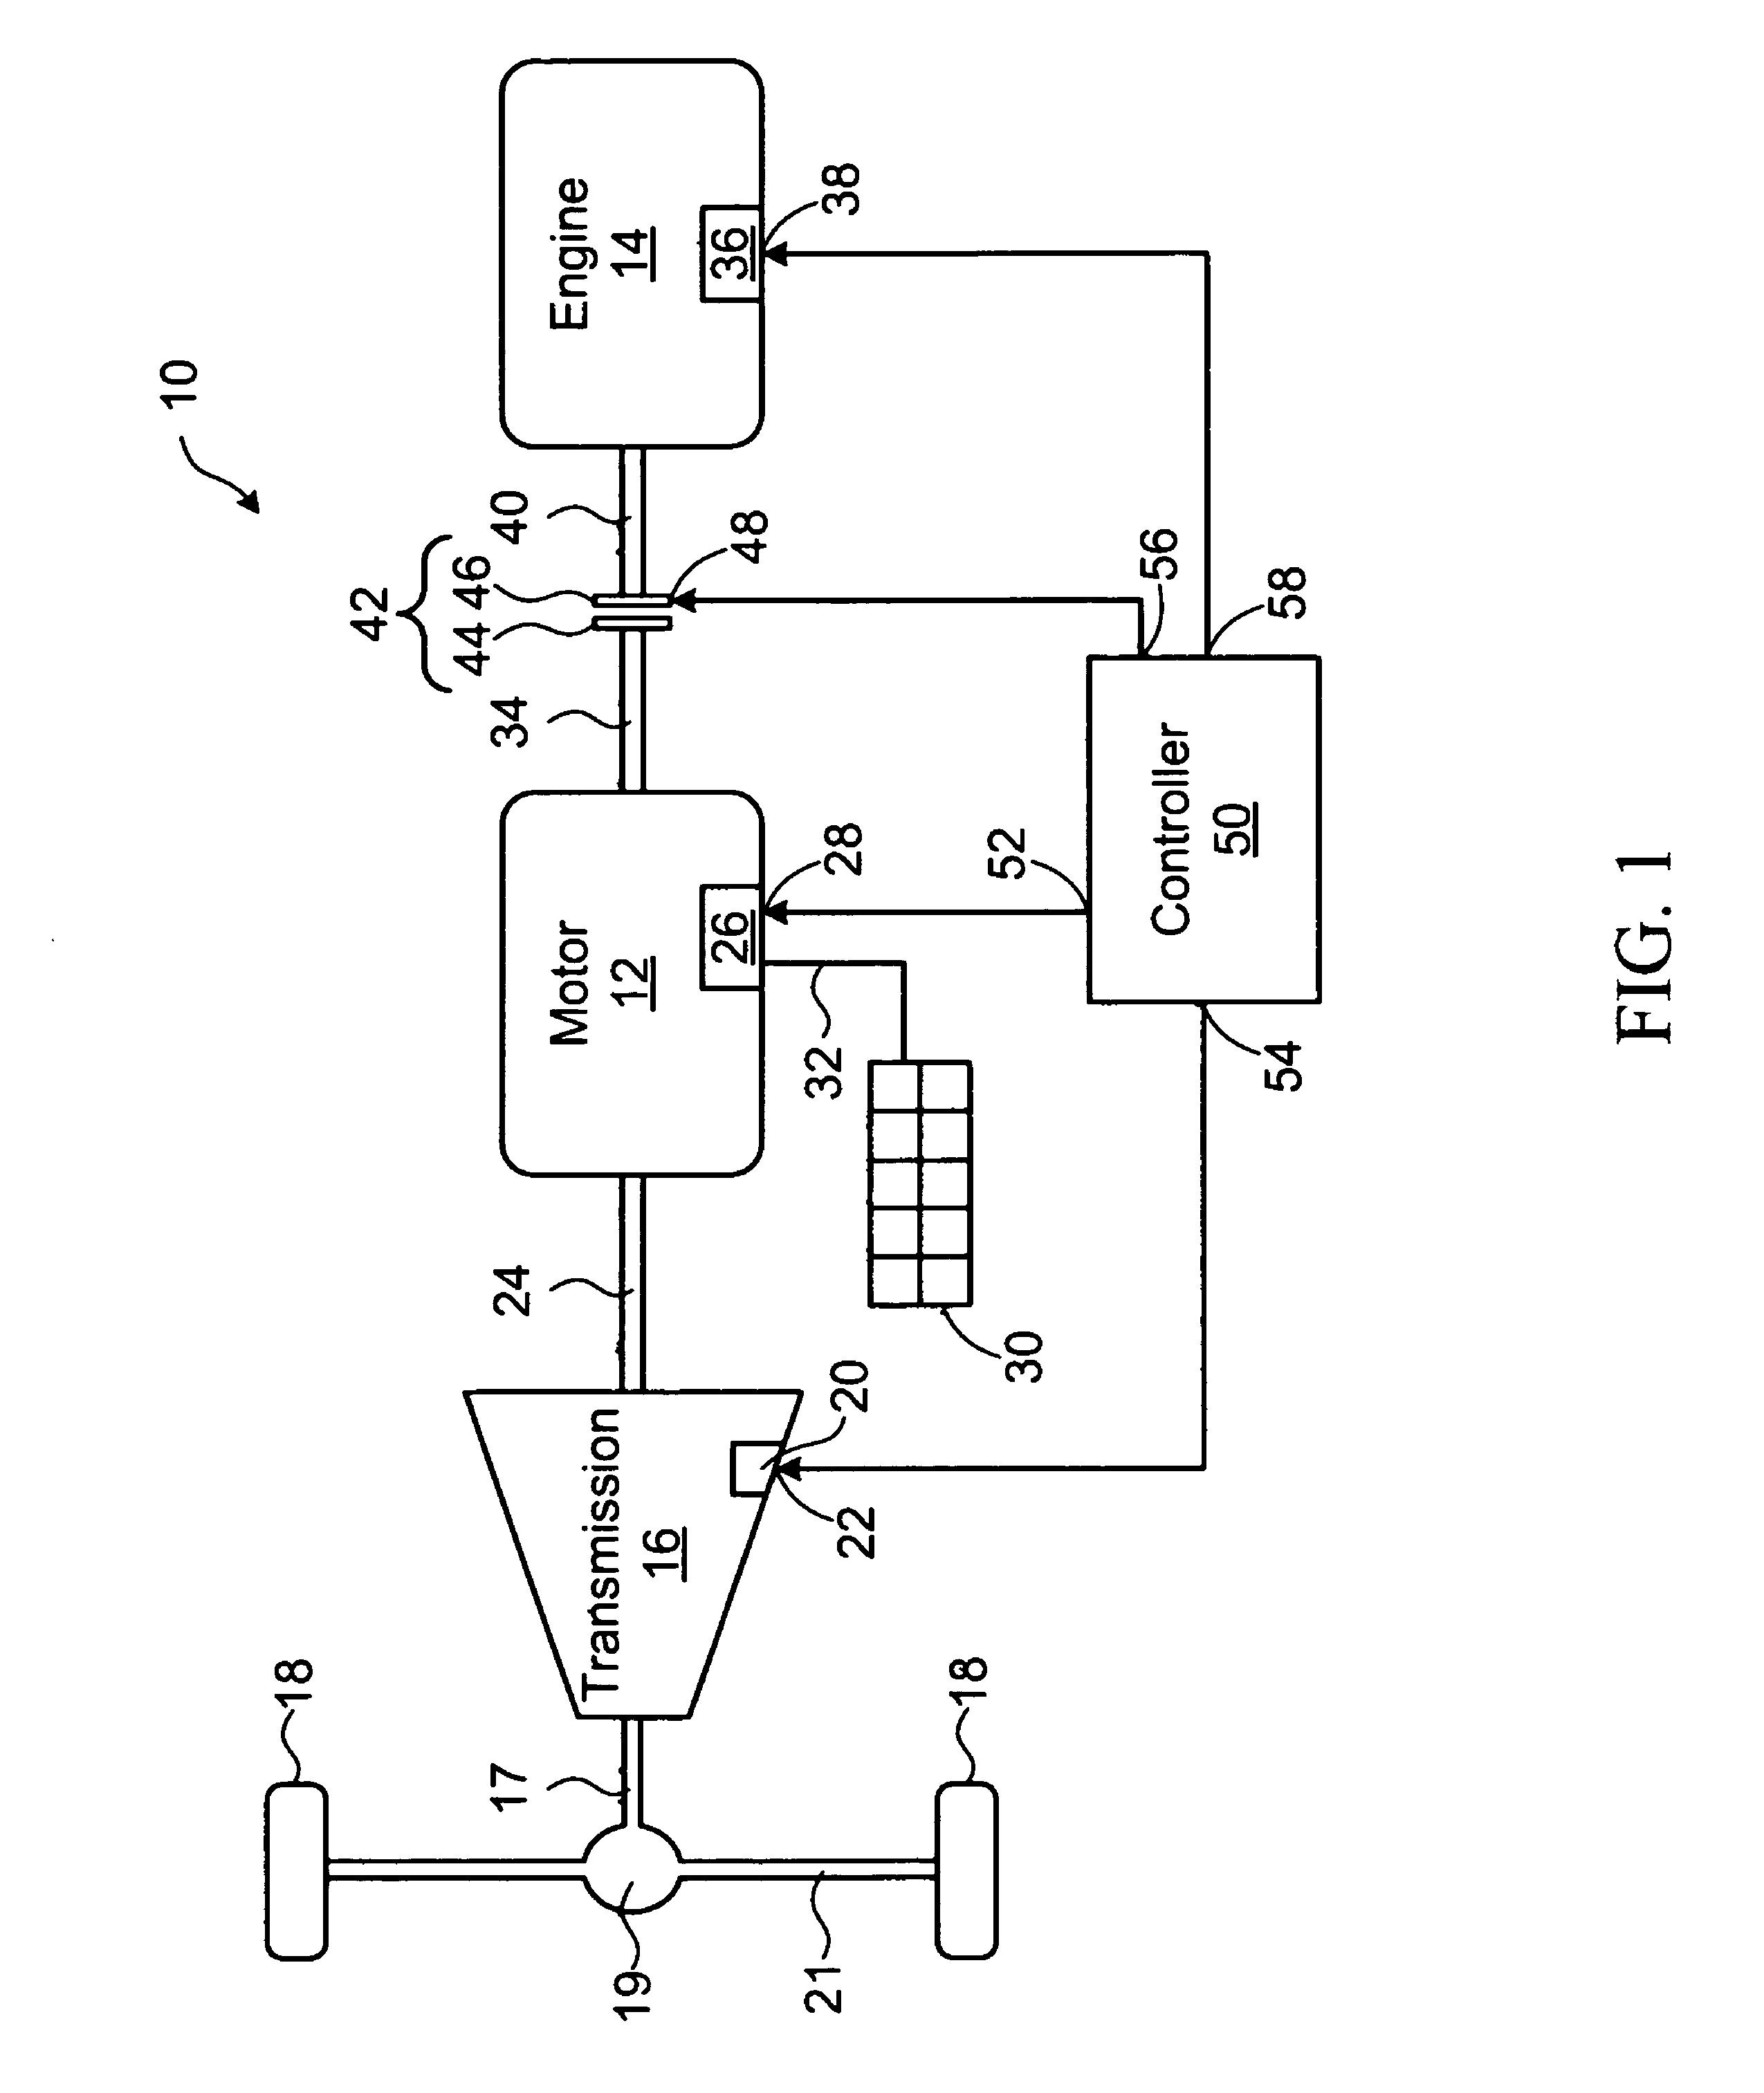 Method and apparatus for starting an engine in a hybrid vehicle